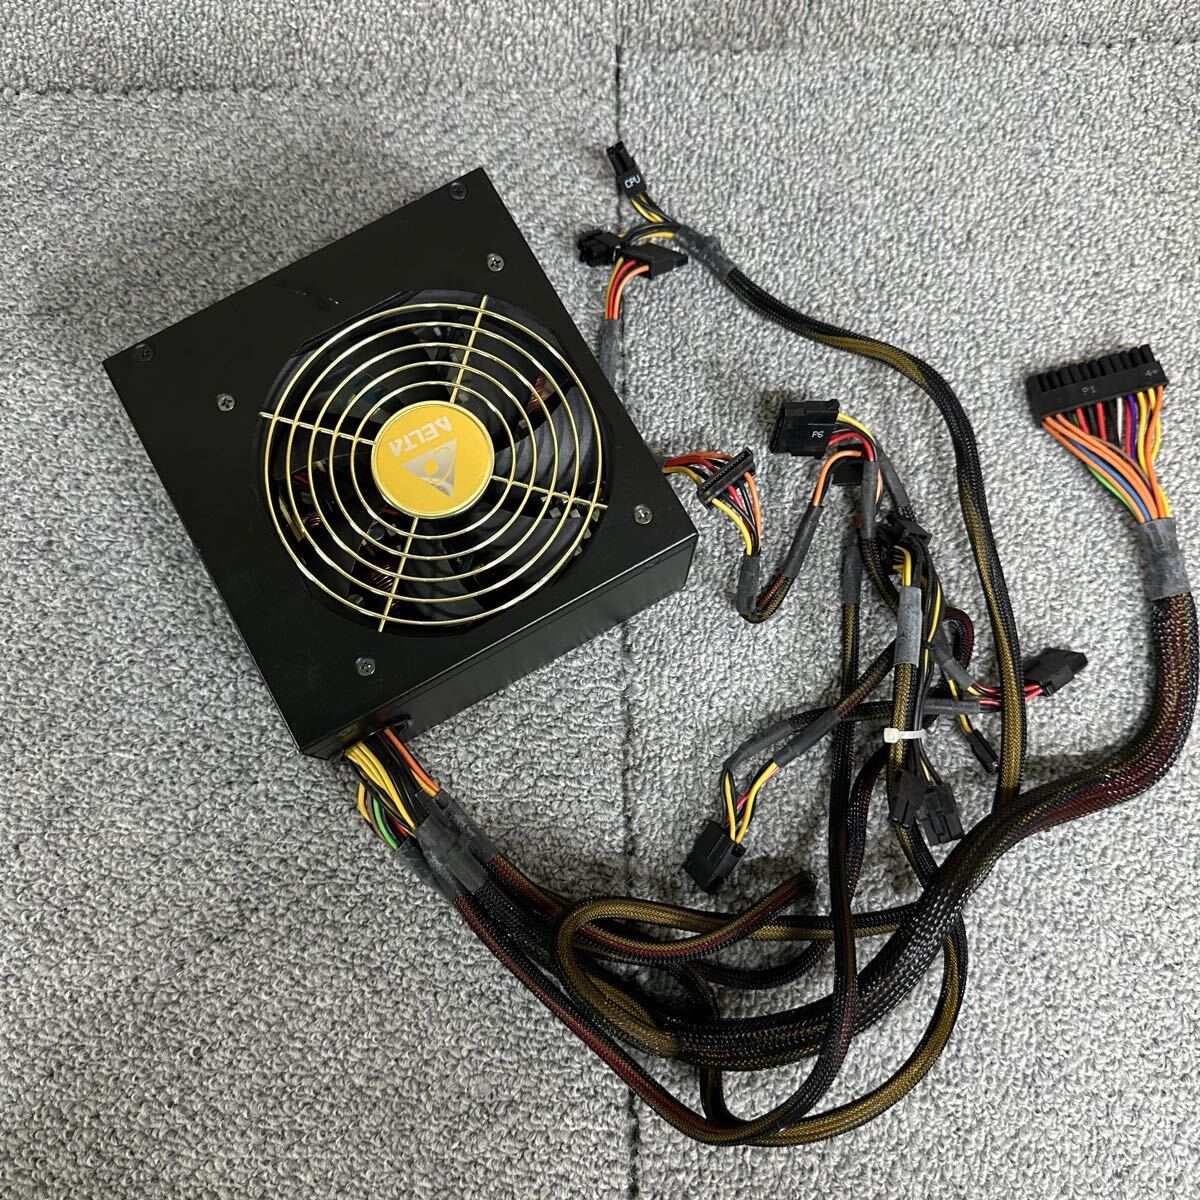 DB3-98 super-discount PC power supply BOX DELTA GPS-500EB D 500W 80PLUS BRONZE power supply unit power supply tester .. voltage has confirmed secondhand goods 